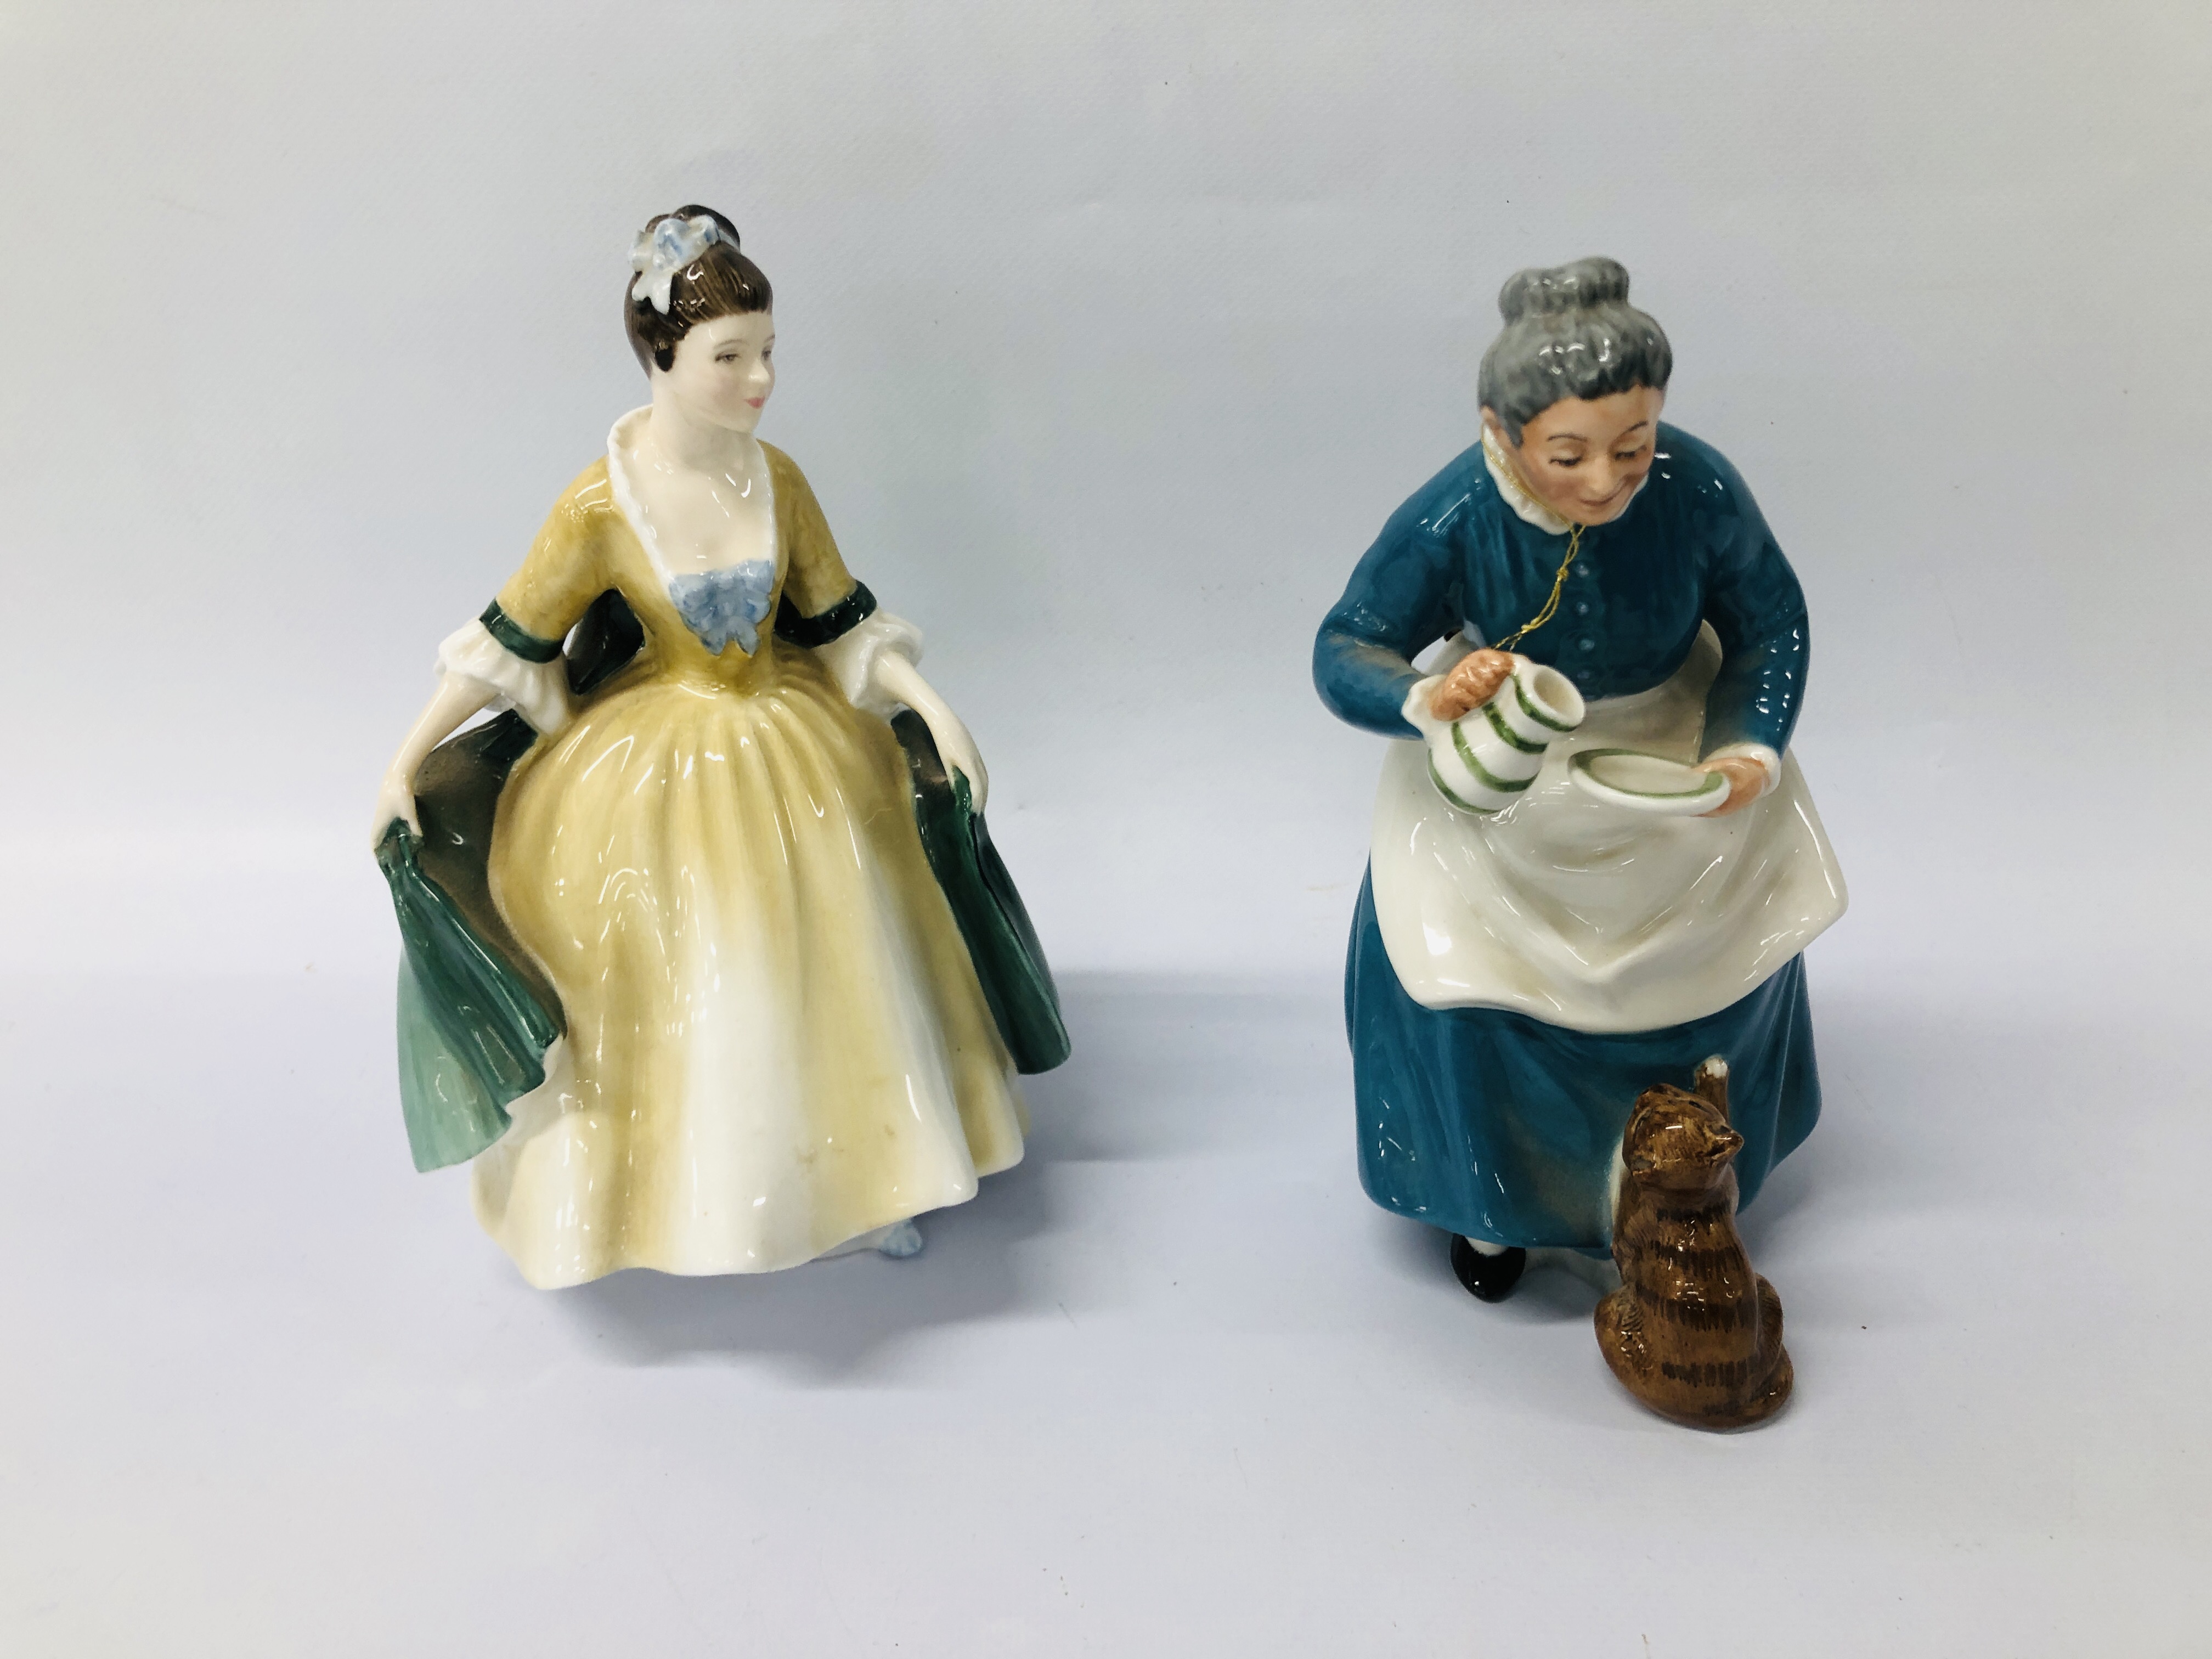 2 X ROYAL DOULTON FIGURINES TO INCLUDE ELEGANCE HN 2264 AND THE FAVOURITE HN 2249.